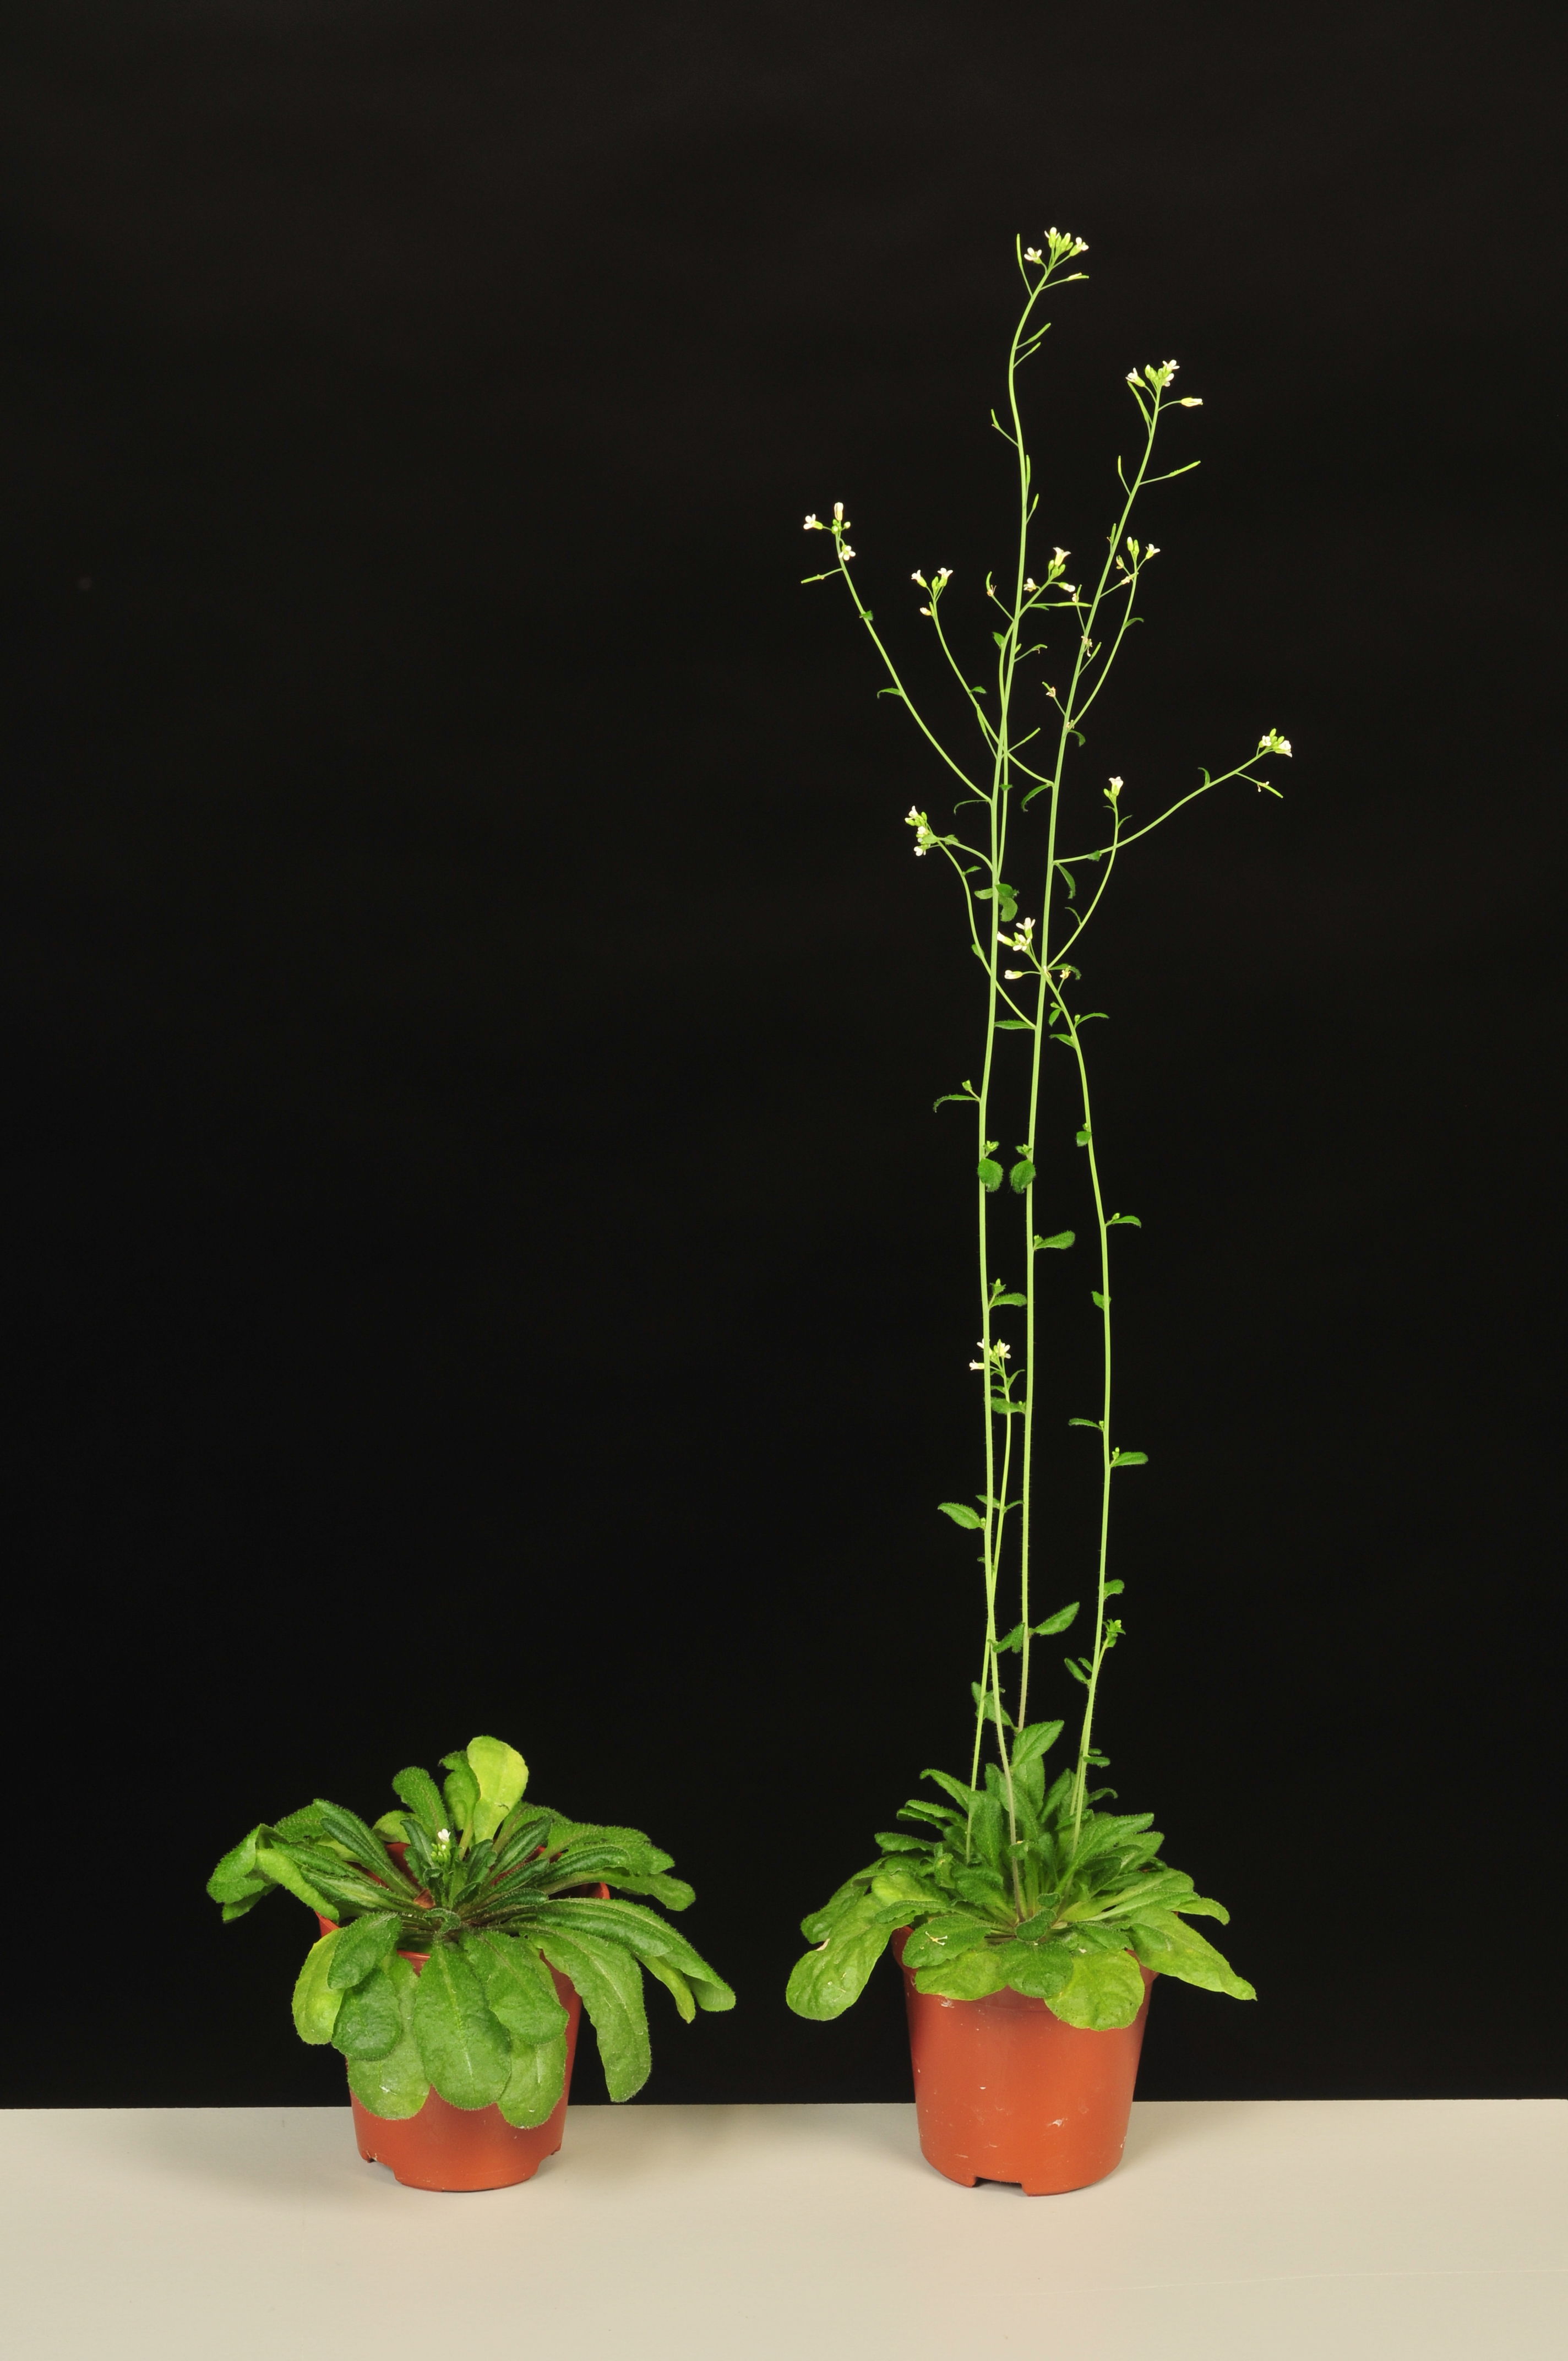 Left a WT variant, and right a cpl3 mutant of an Arabidopsis plant